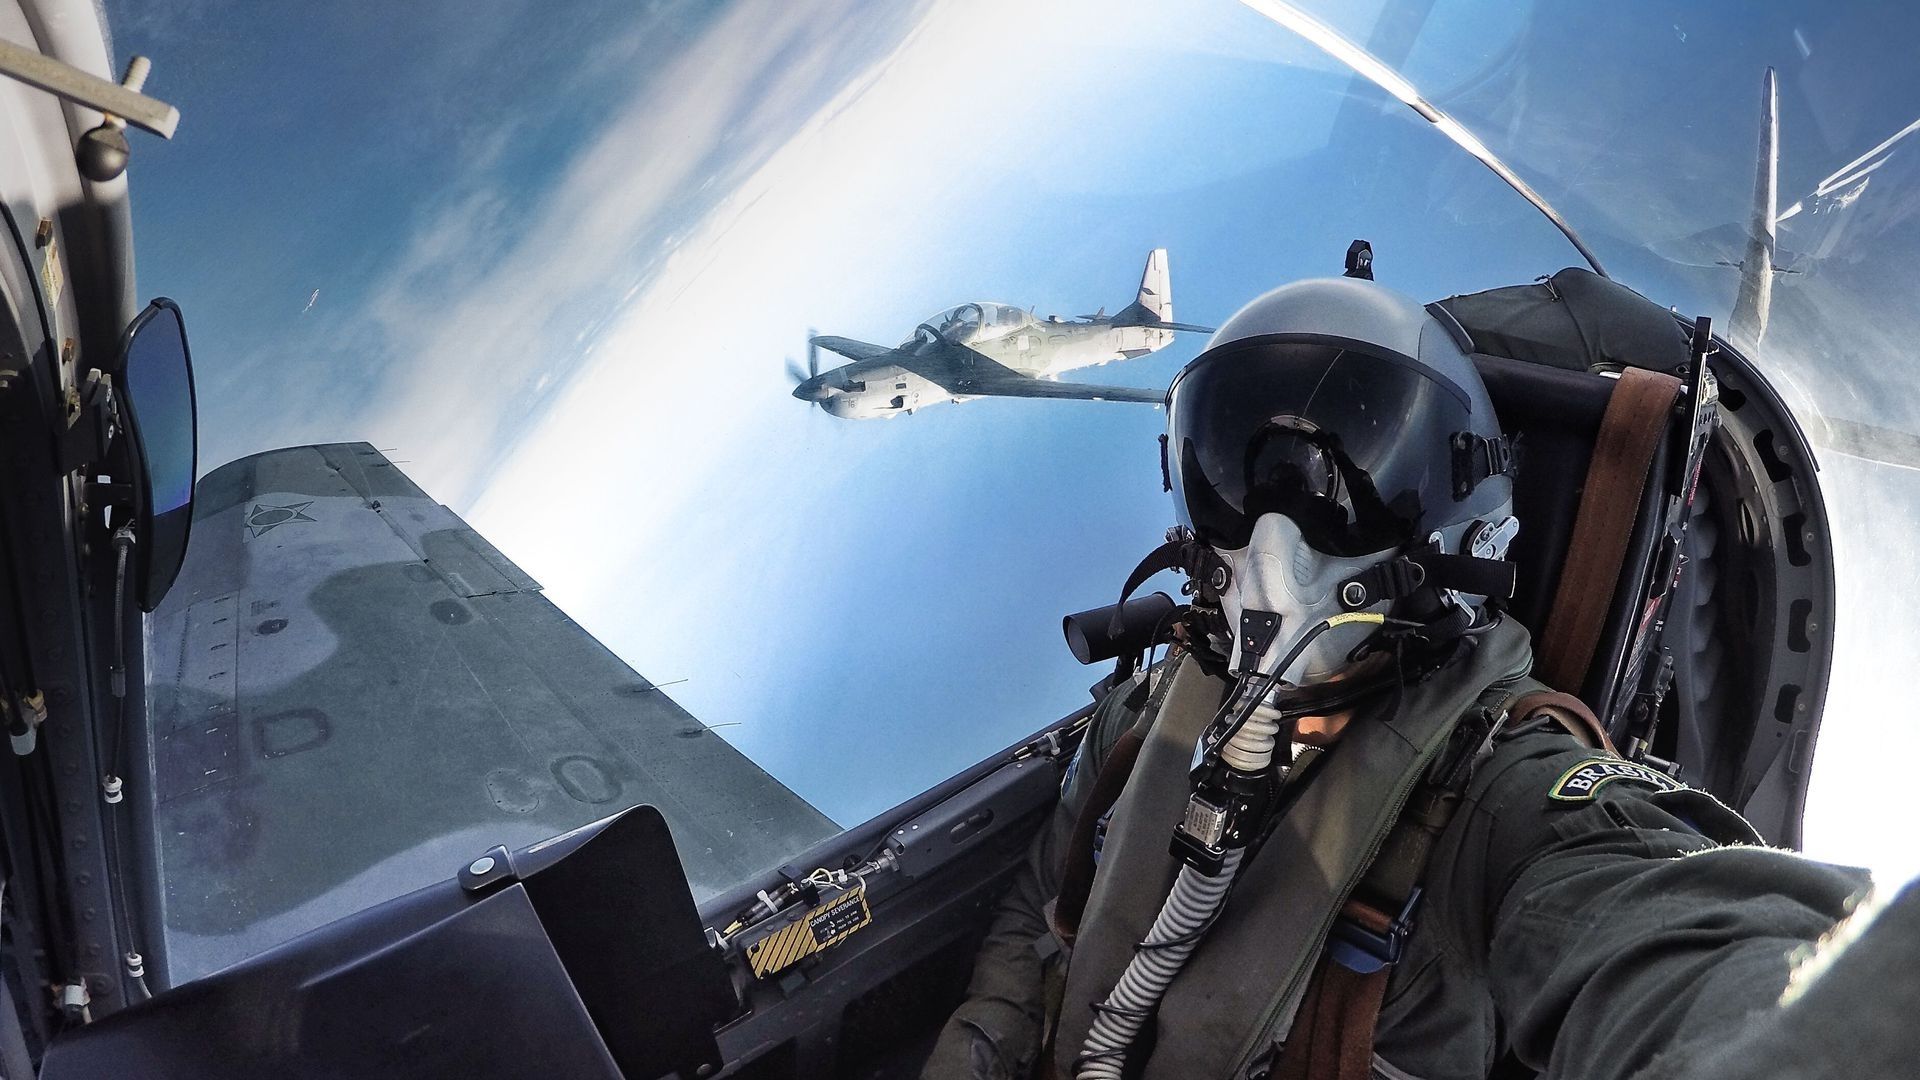 The Best Gopro Photos In The World Prepare To Lose Your Breath image 2